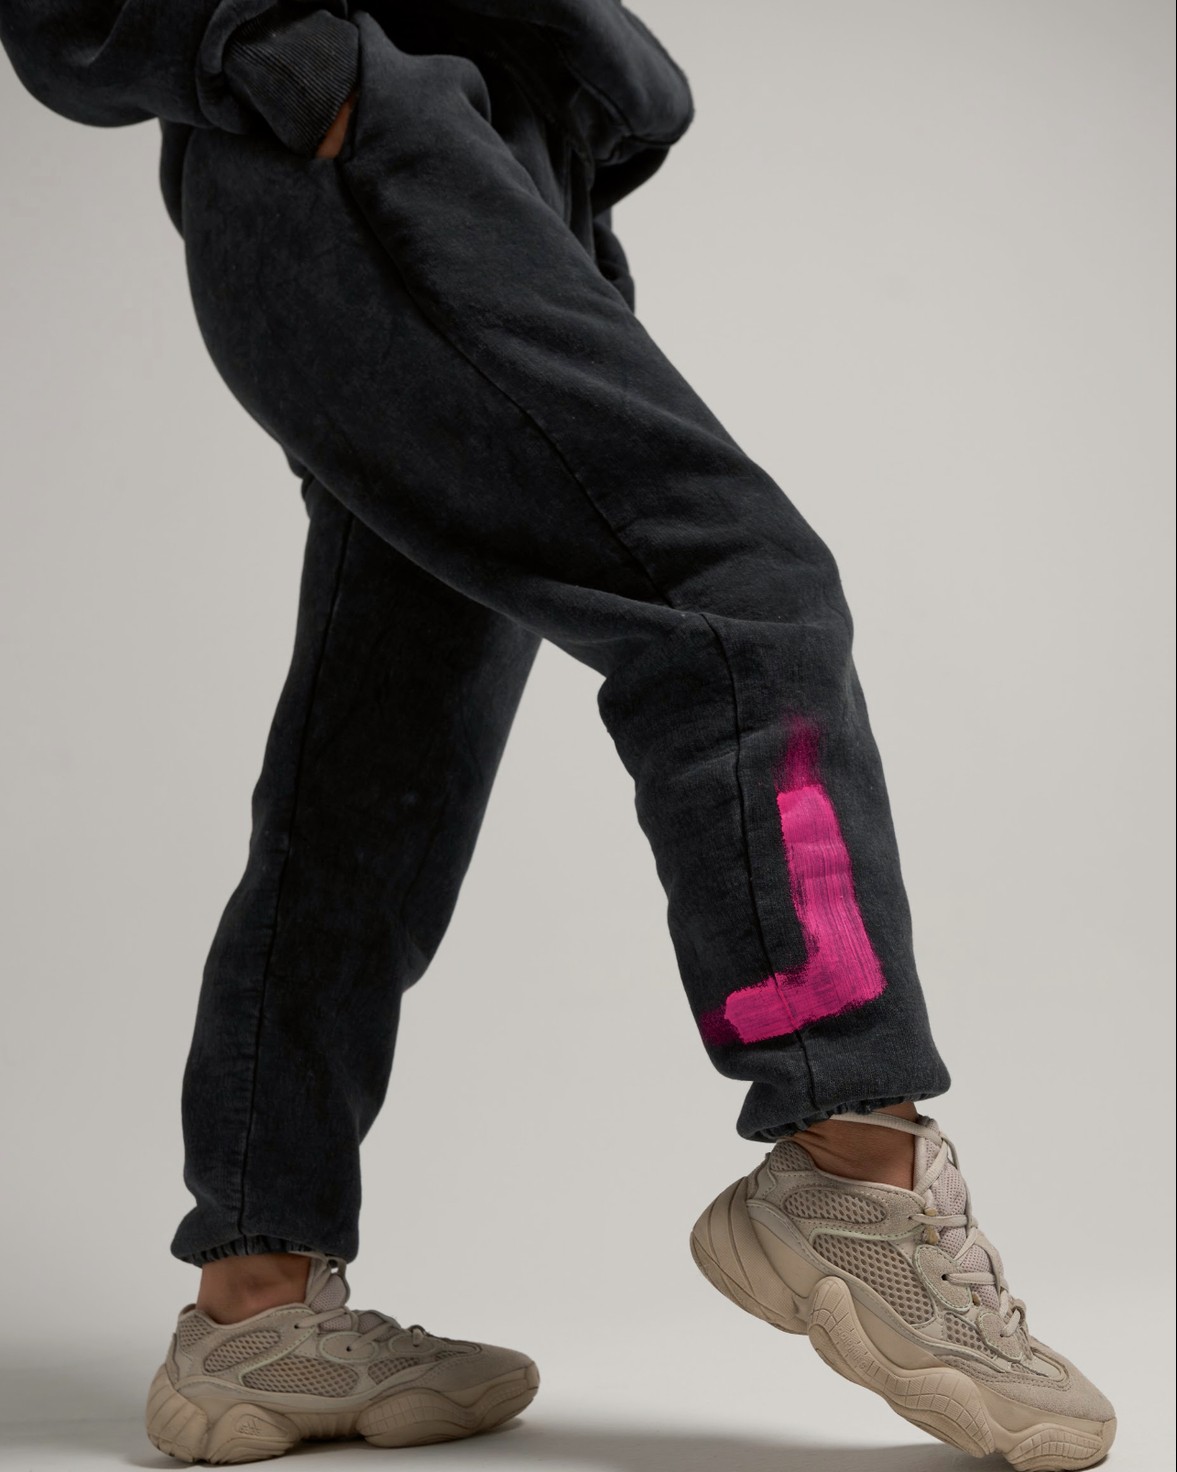 CHARCOAL GREY SOFT PANTS WITH PINK LOGO